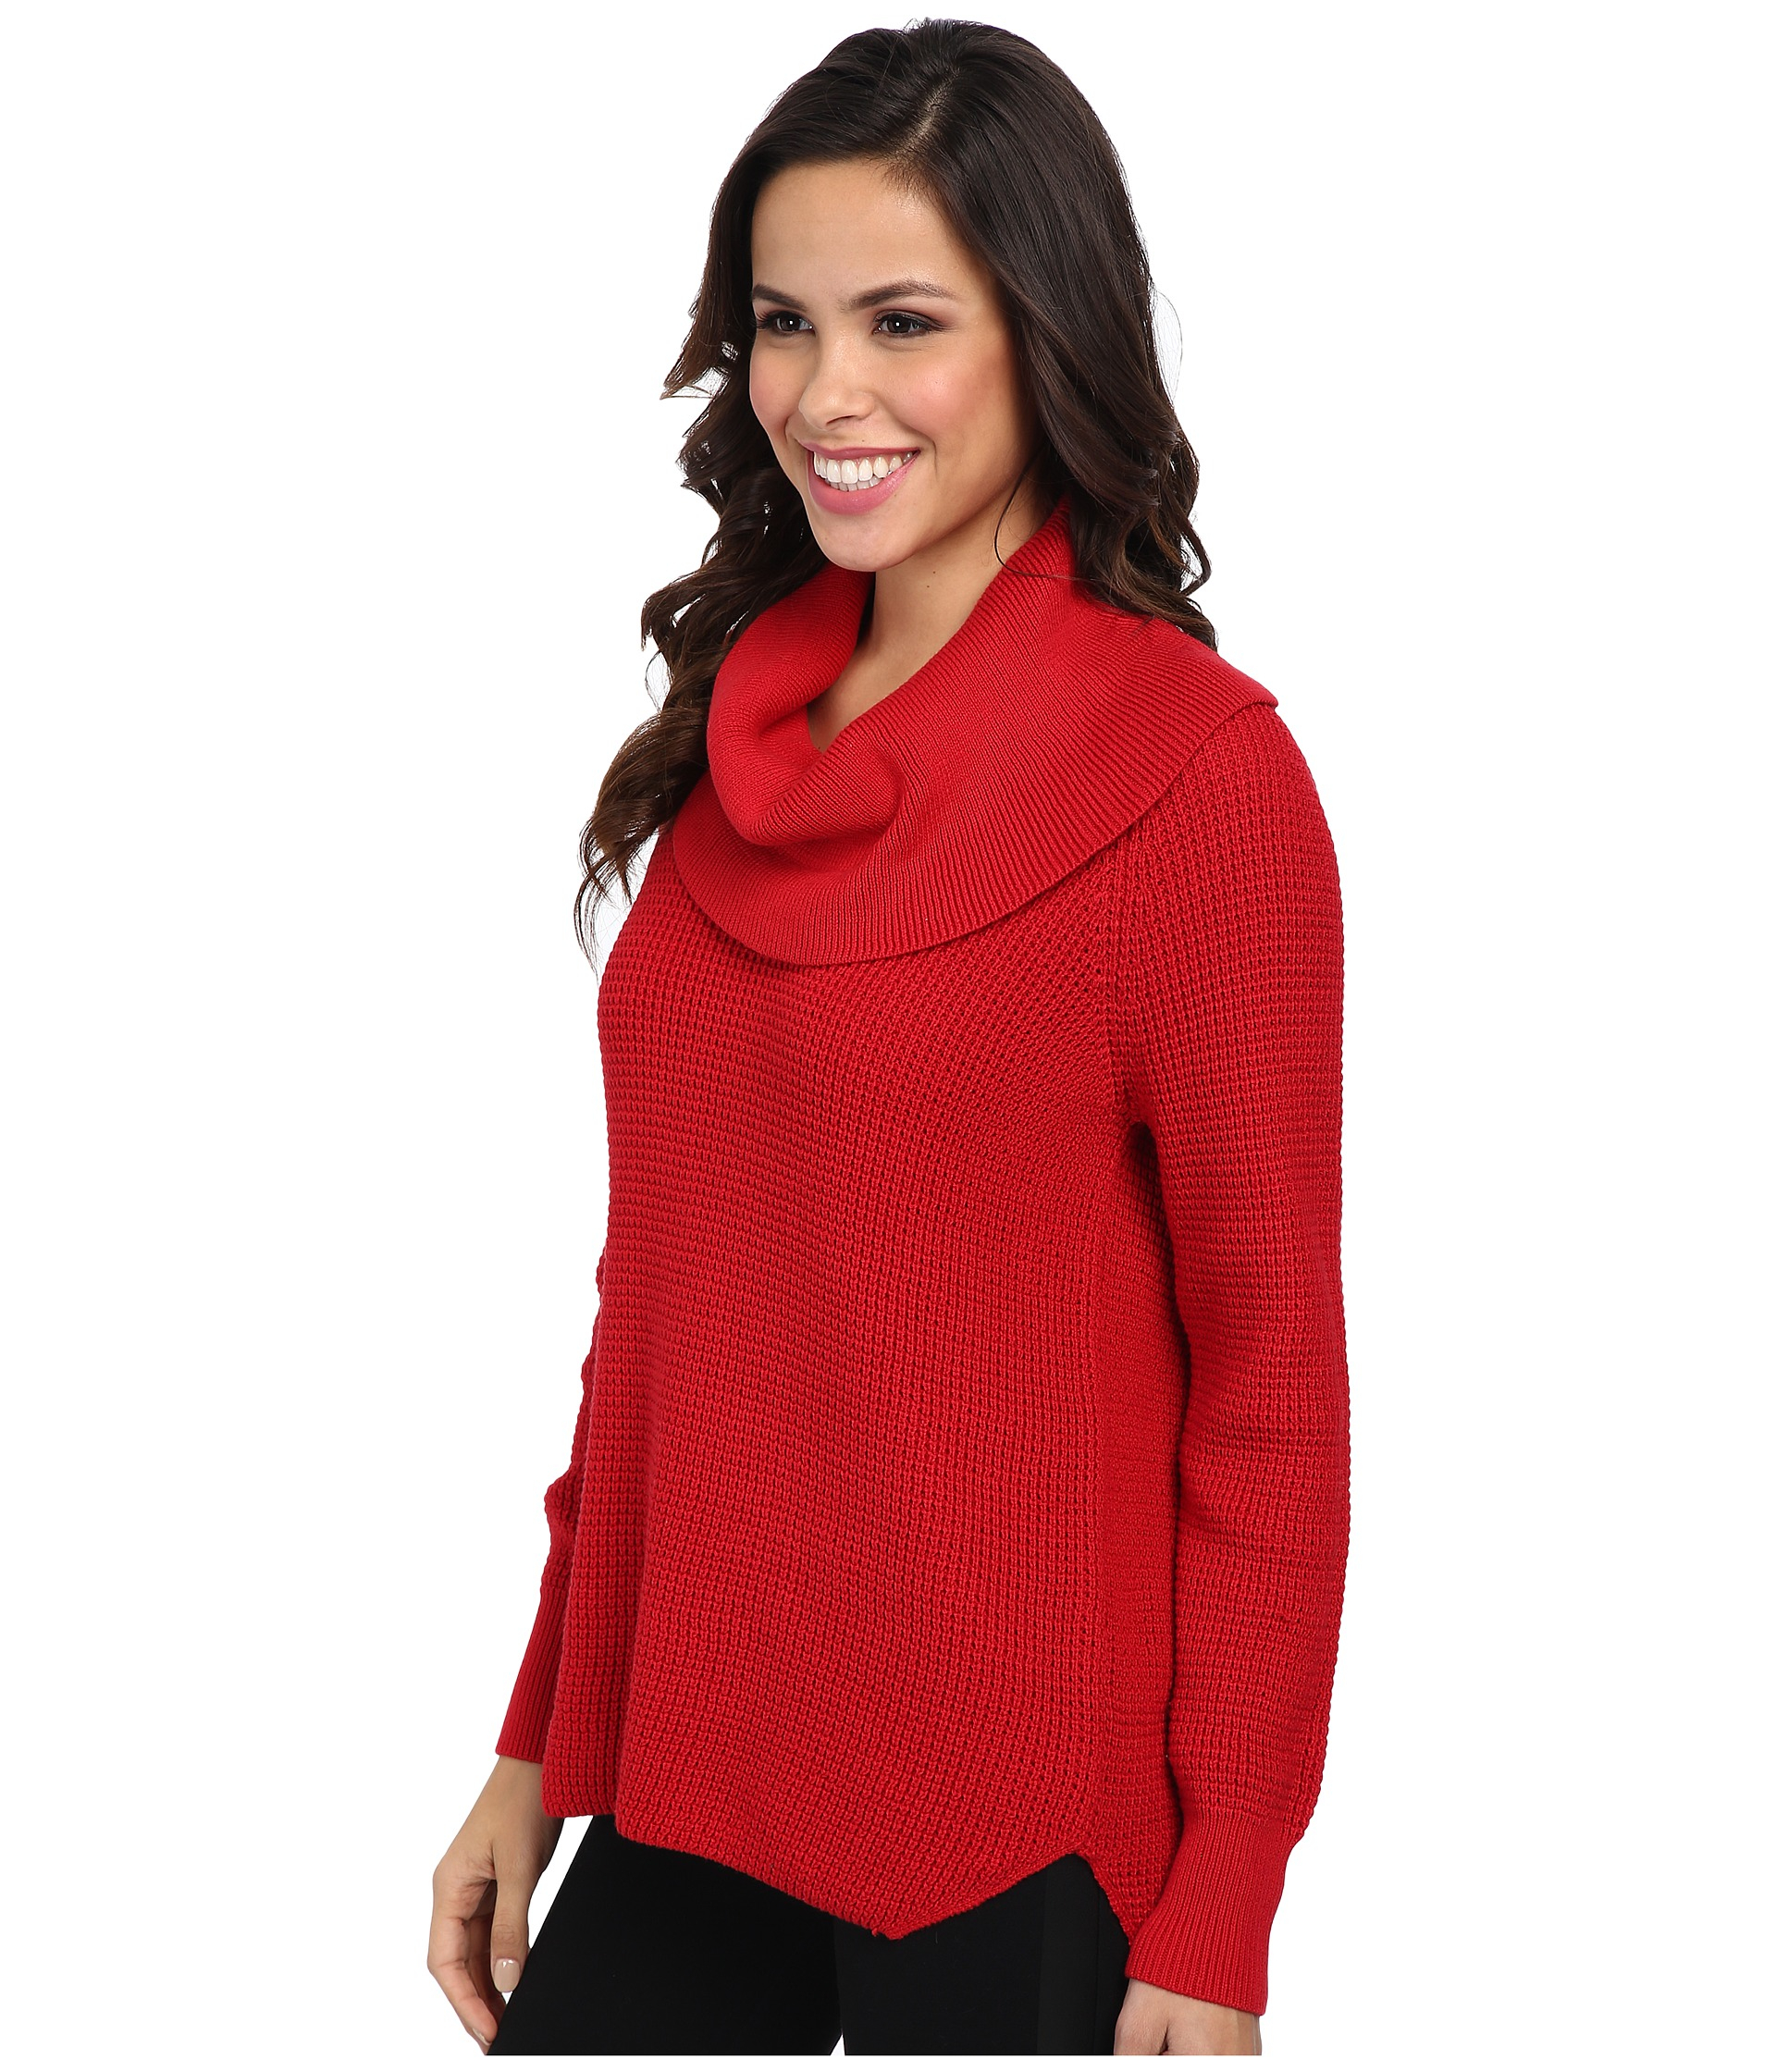 Lyst - Michael Michael Kors Cowl Neck Sweater in Red